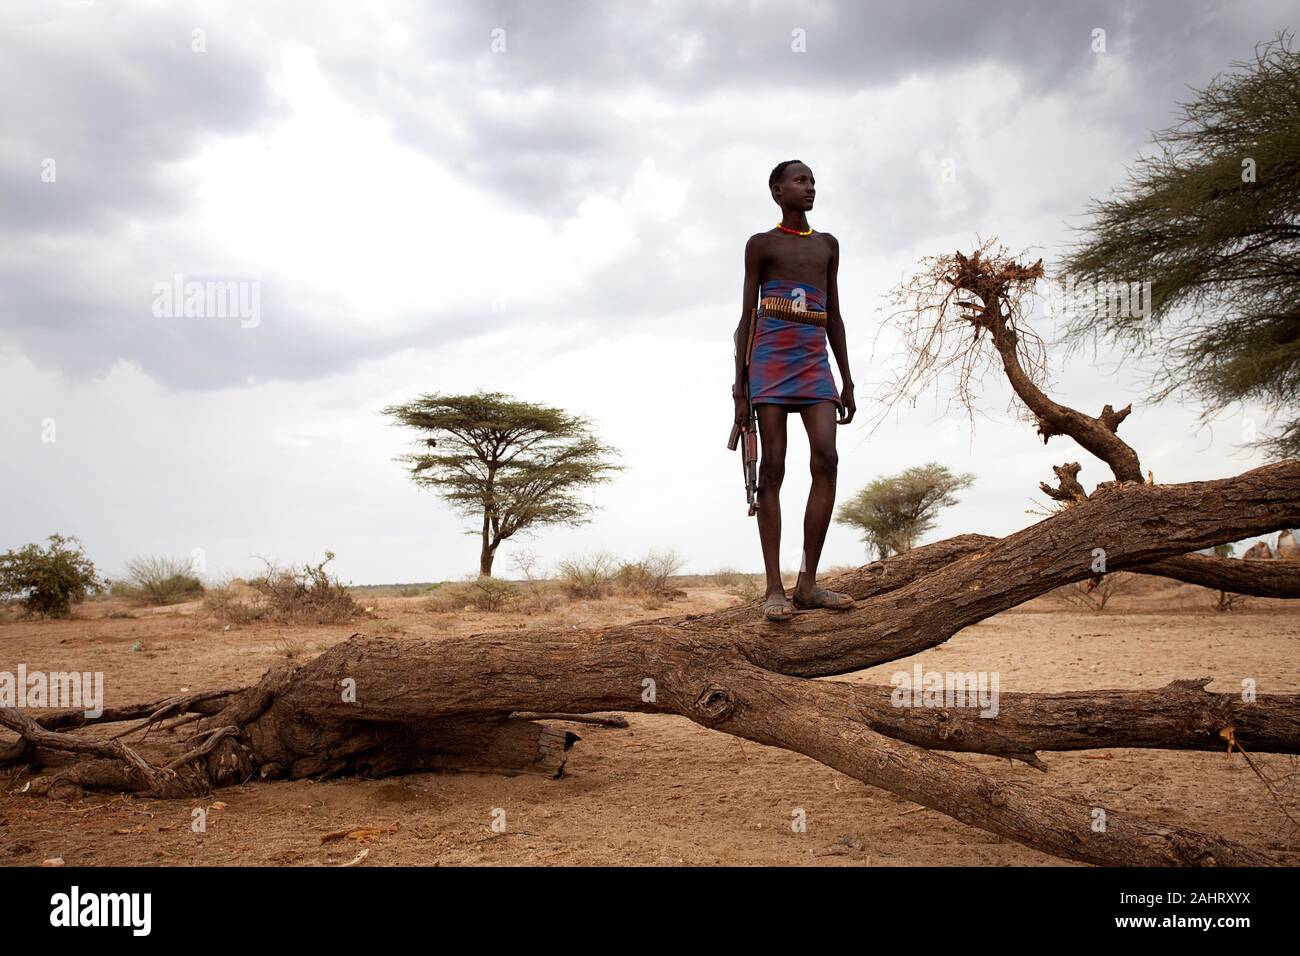 Young man of Dassanech tribe standing on a tree branch with a gun in his hands, Omo valley, Ethiopia Stock Photo